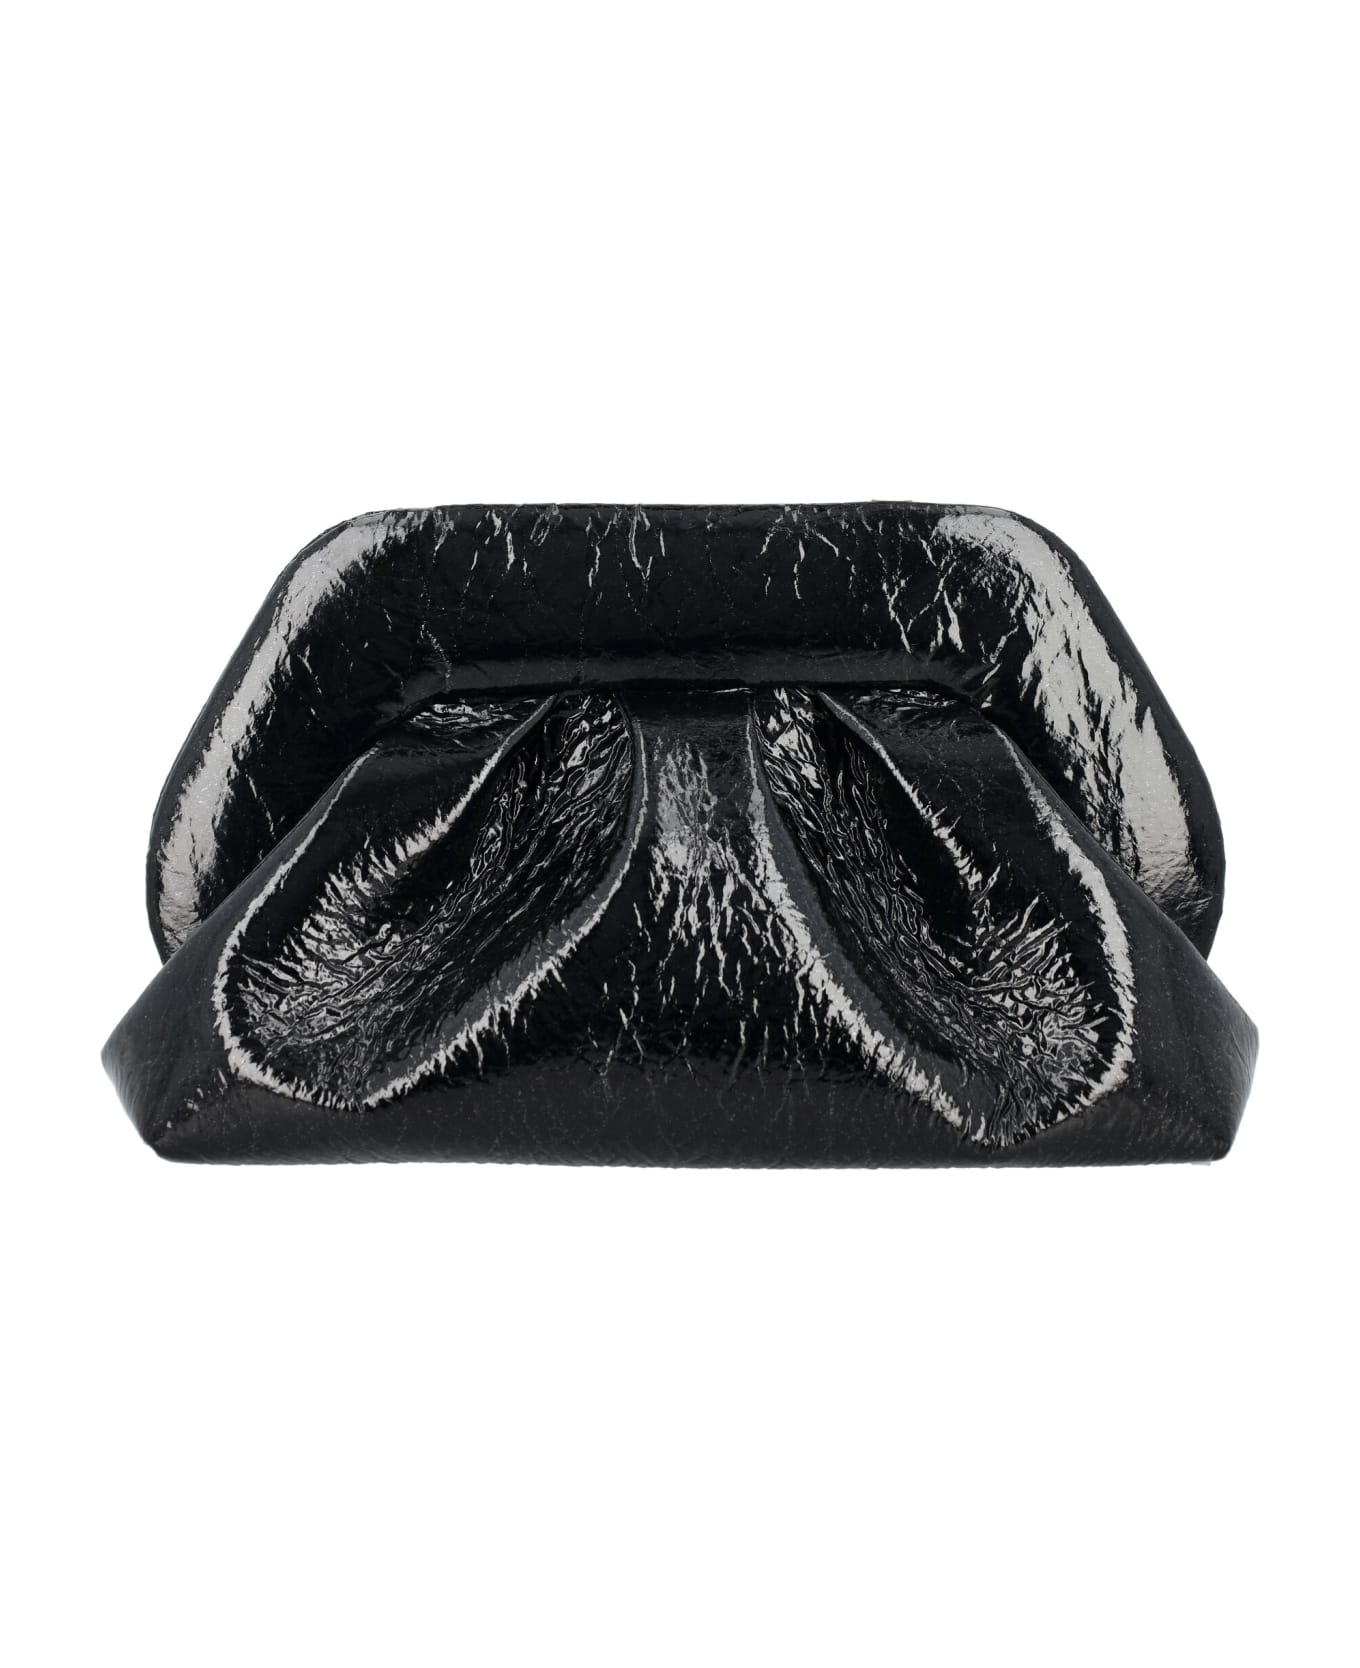 THEMOIRè Tia Clutch Pineapple Leather - BLACK クラッチバッグ